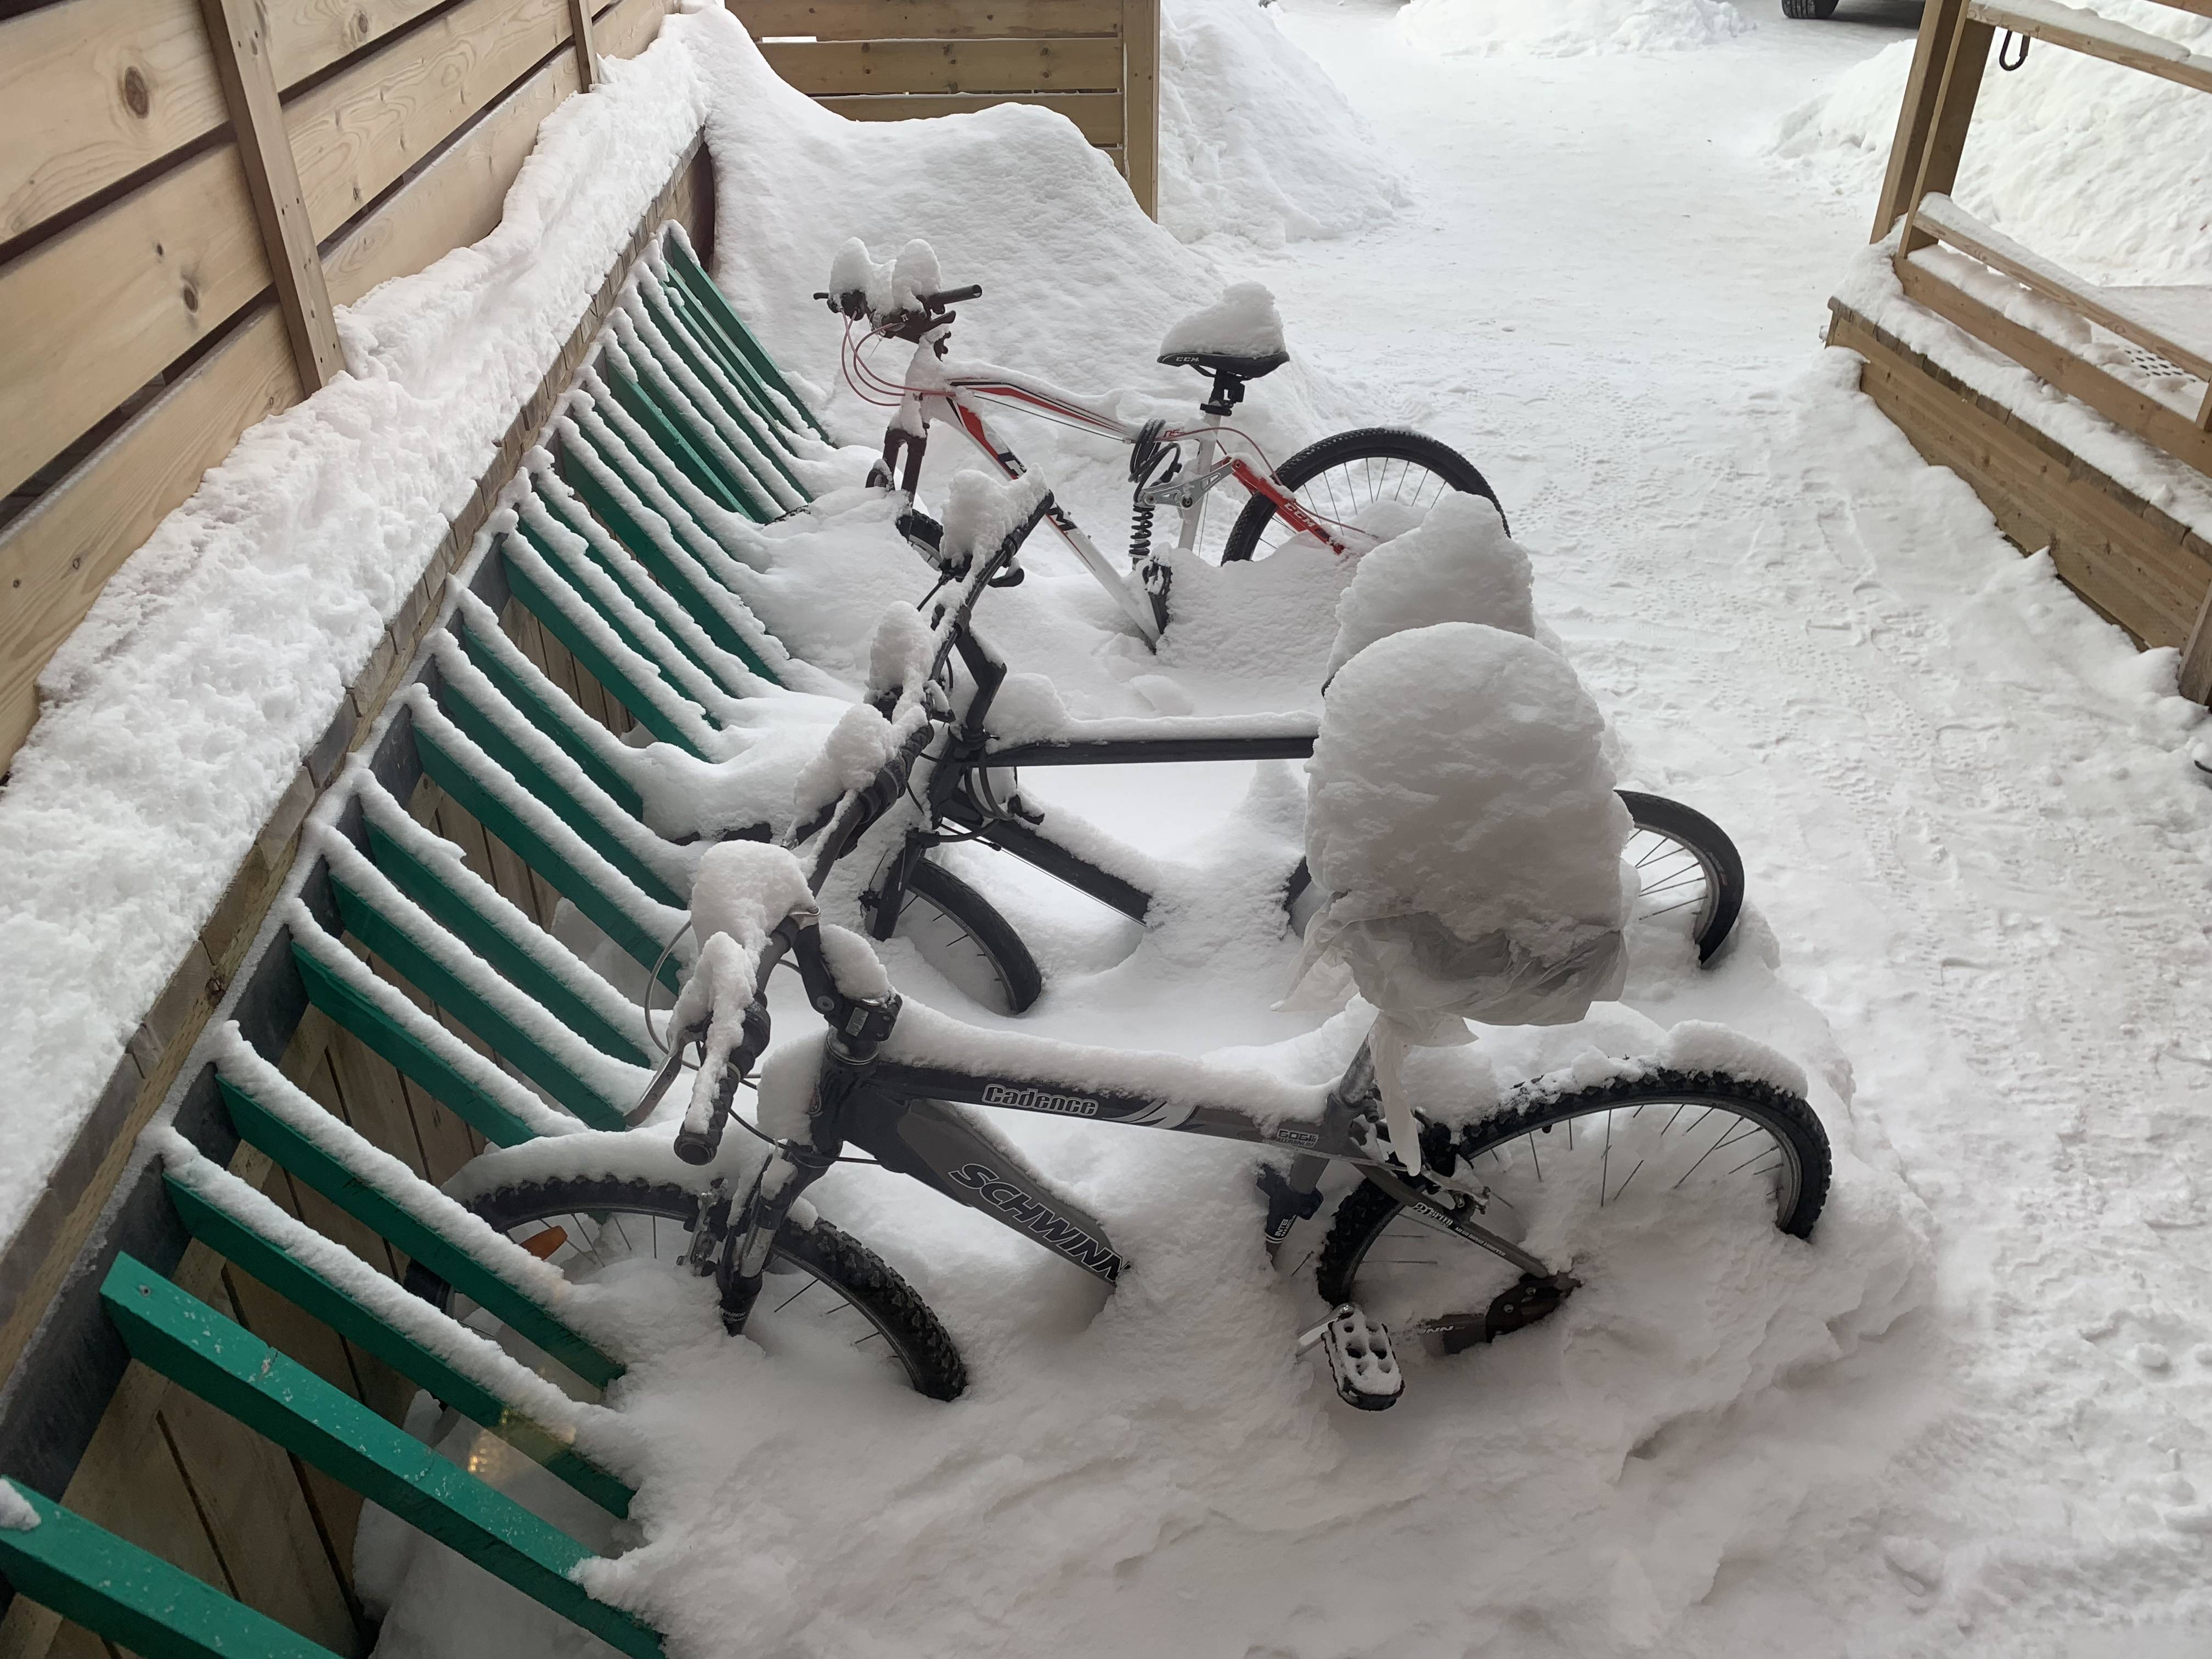 Yellowknife Canada Travel Tour Tips - Bikes covered in snow